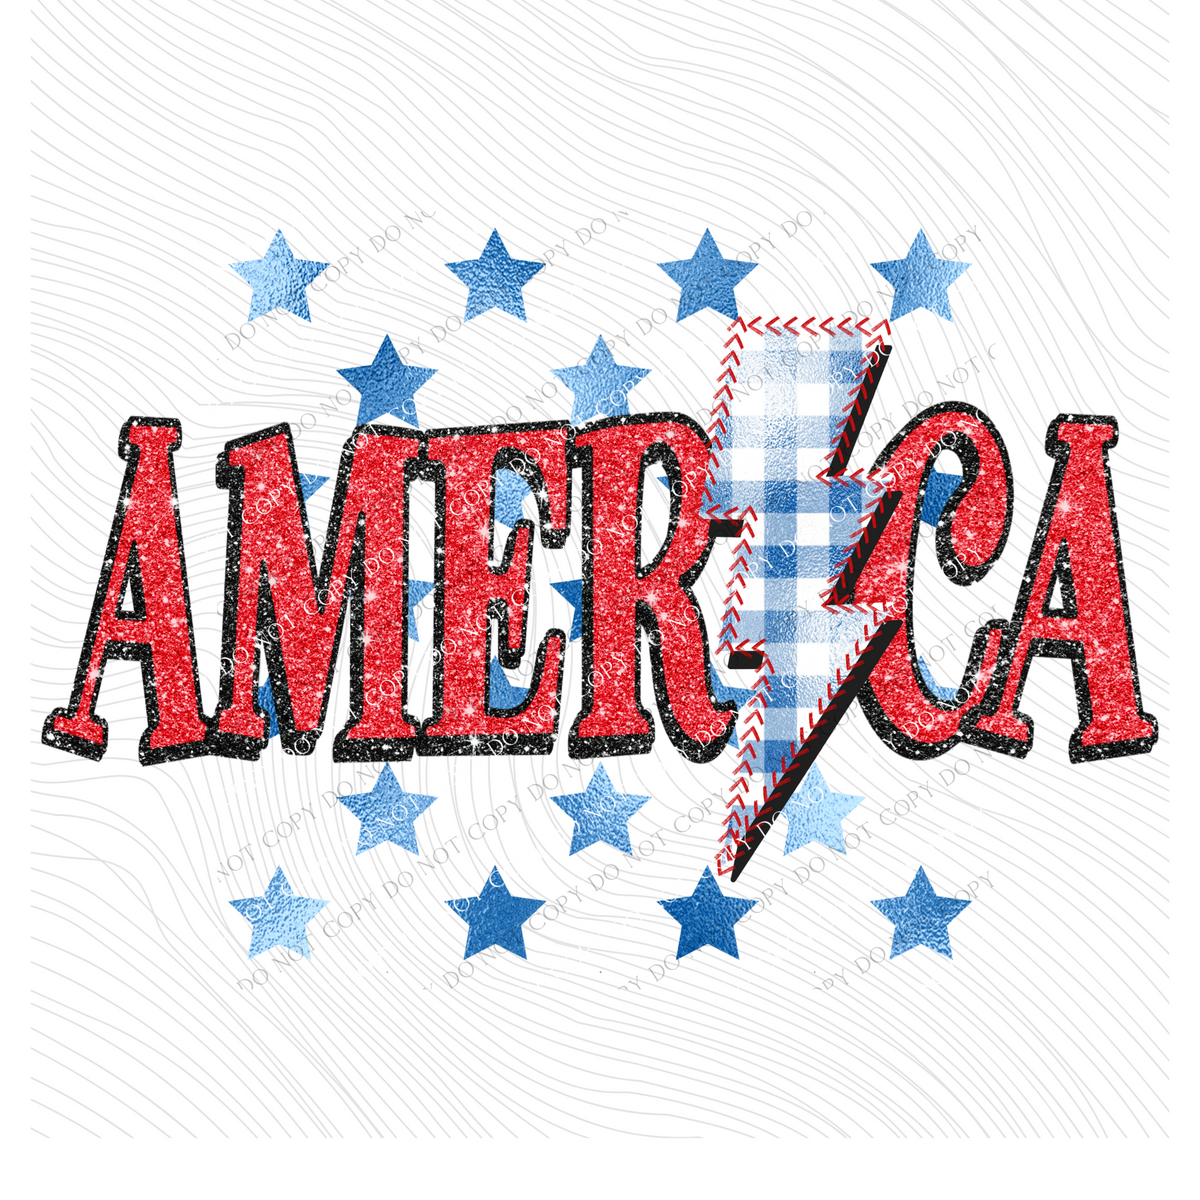 America Glitter with Foil Stars & Gingham Stitched Bolt in Red, White & Blue Patriotic Digital Design, PNG